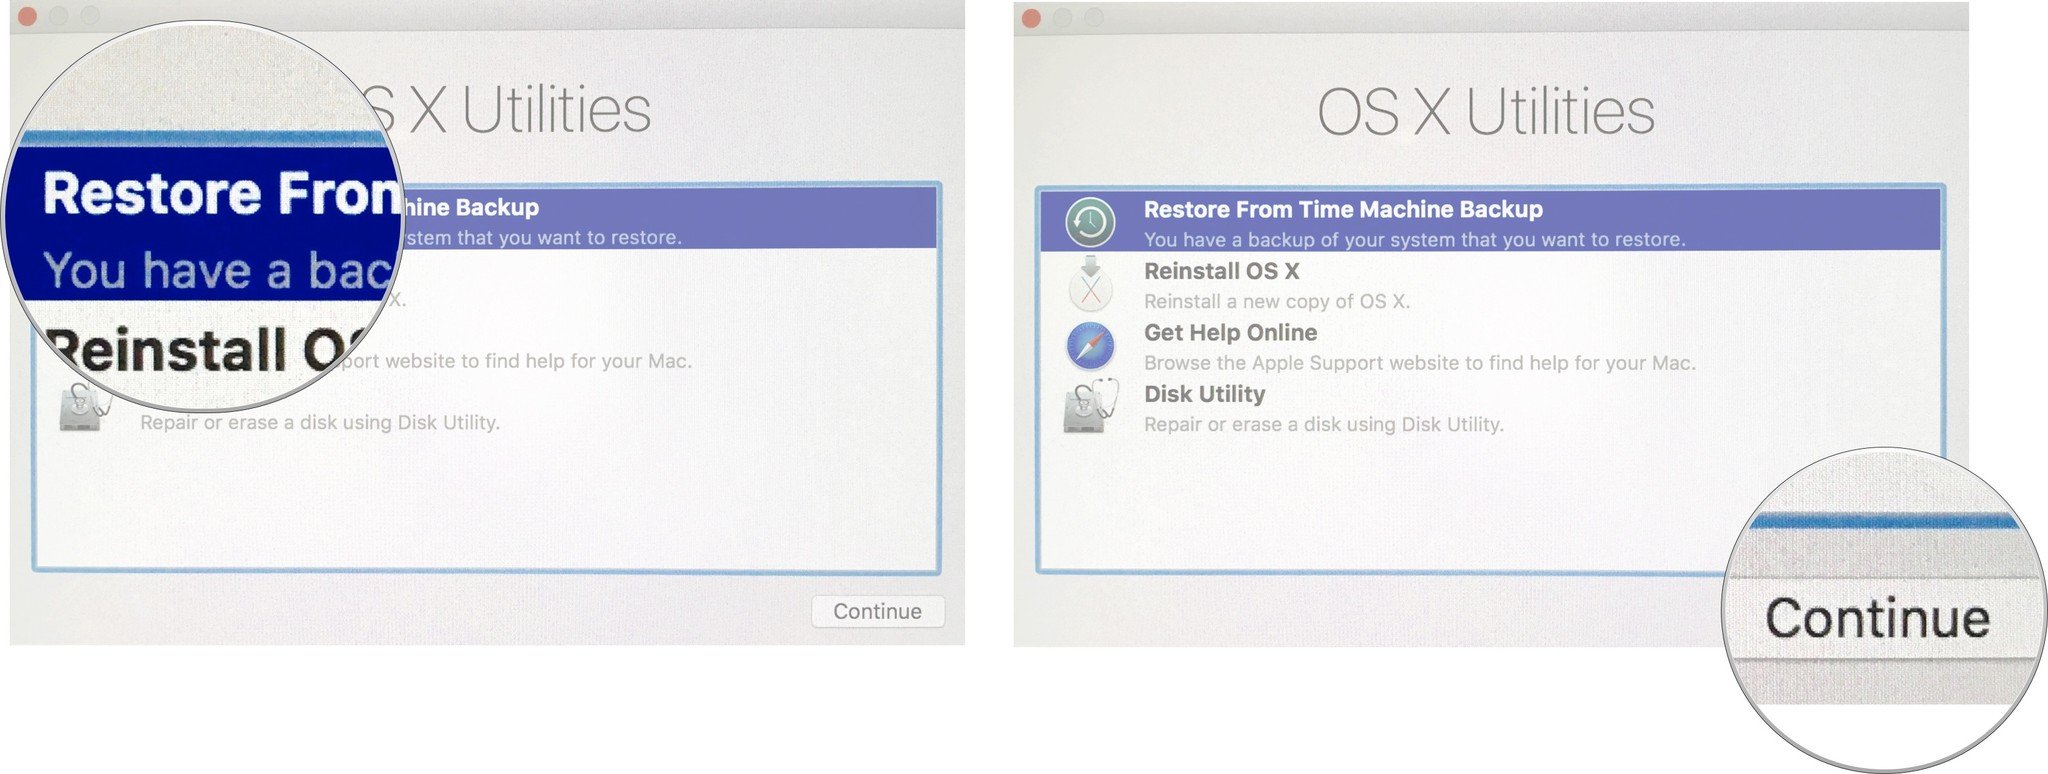 Restoring settings on Mac showing the steps for Selecting restore from backup from the OS X Utilities Selector